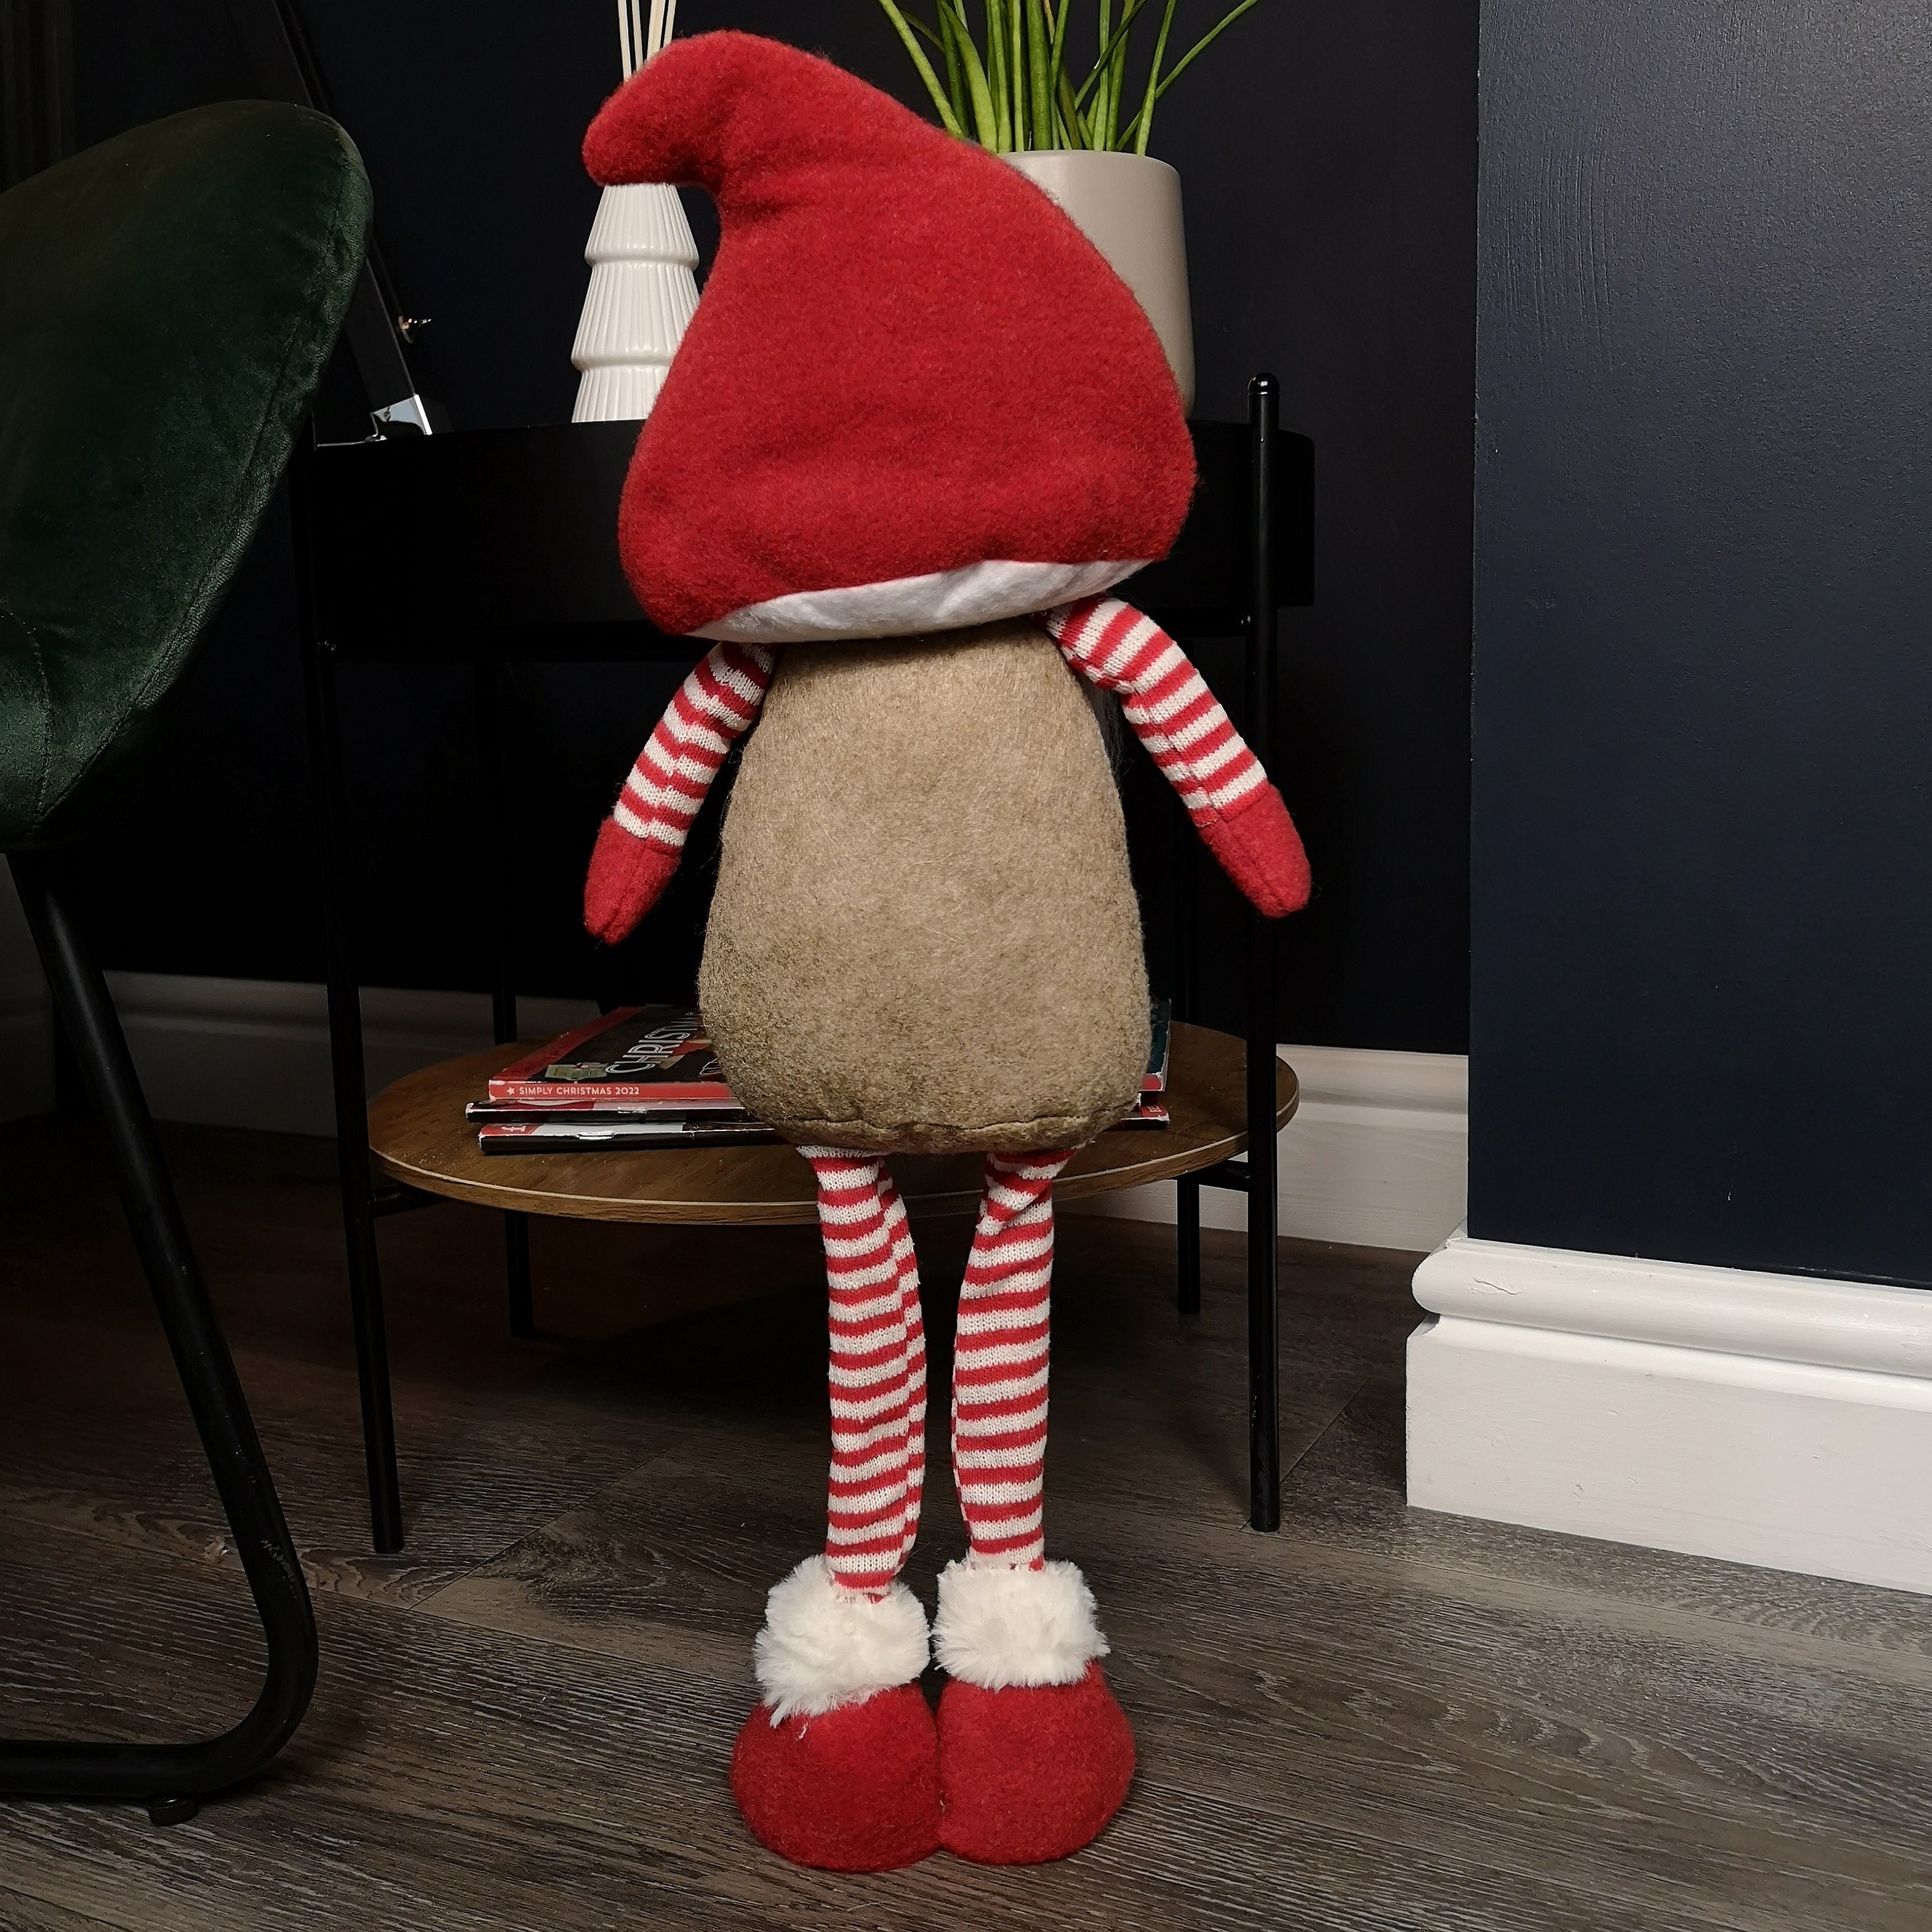 51cm Male Christmas Standing Gonk Decoration with Mushroom Hat